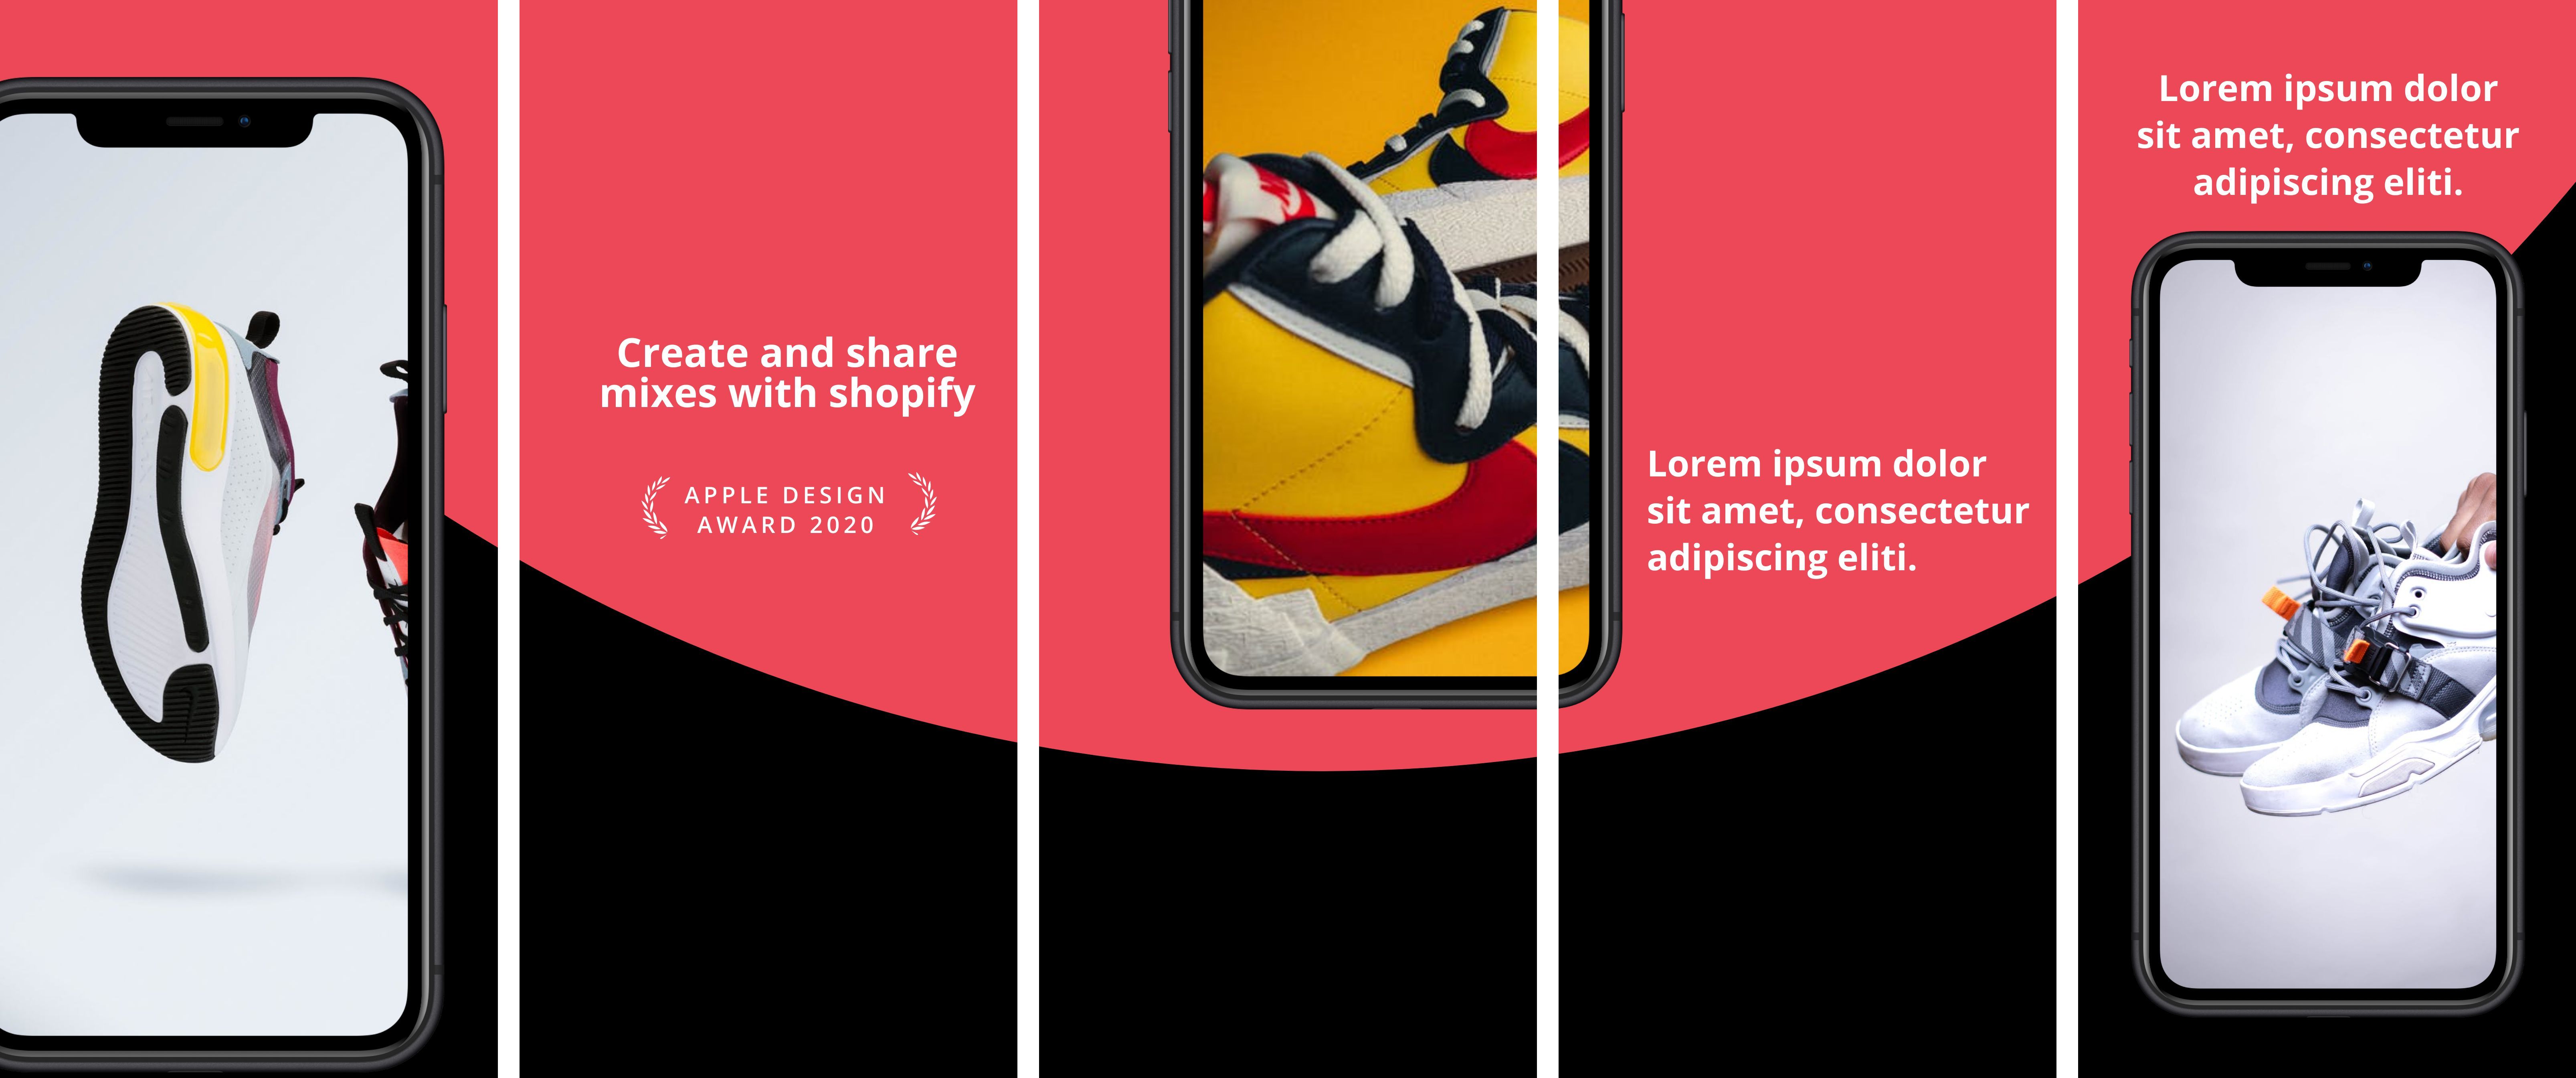 App Store Panorama Screenshot - iPhone XS Max 23 template. Quickly edit text, colors, images, and more for free.